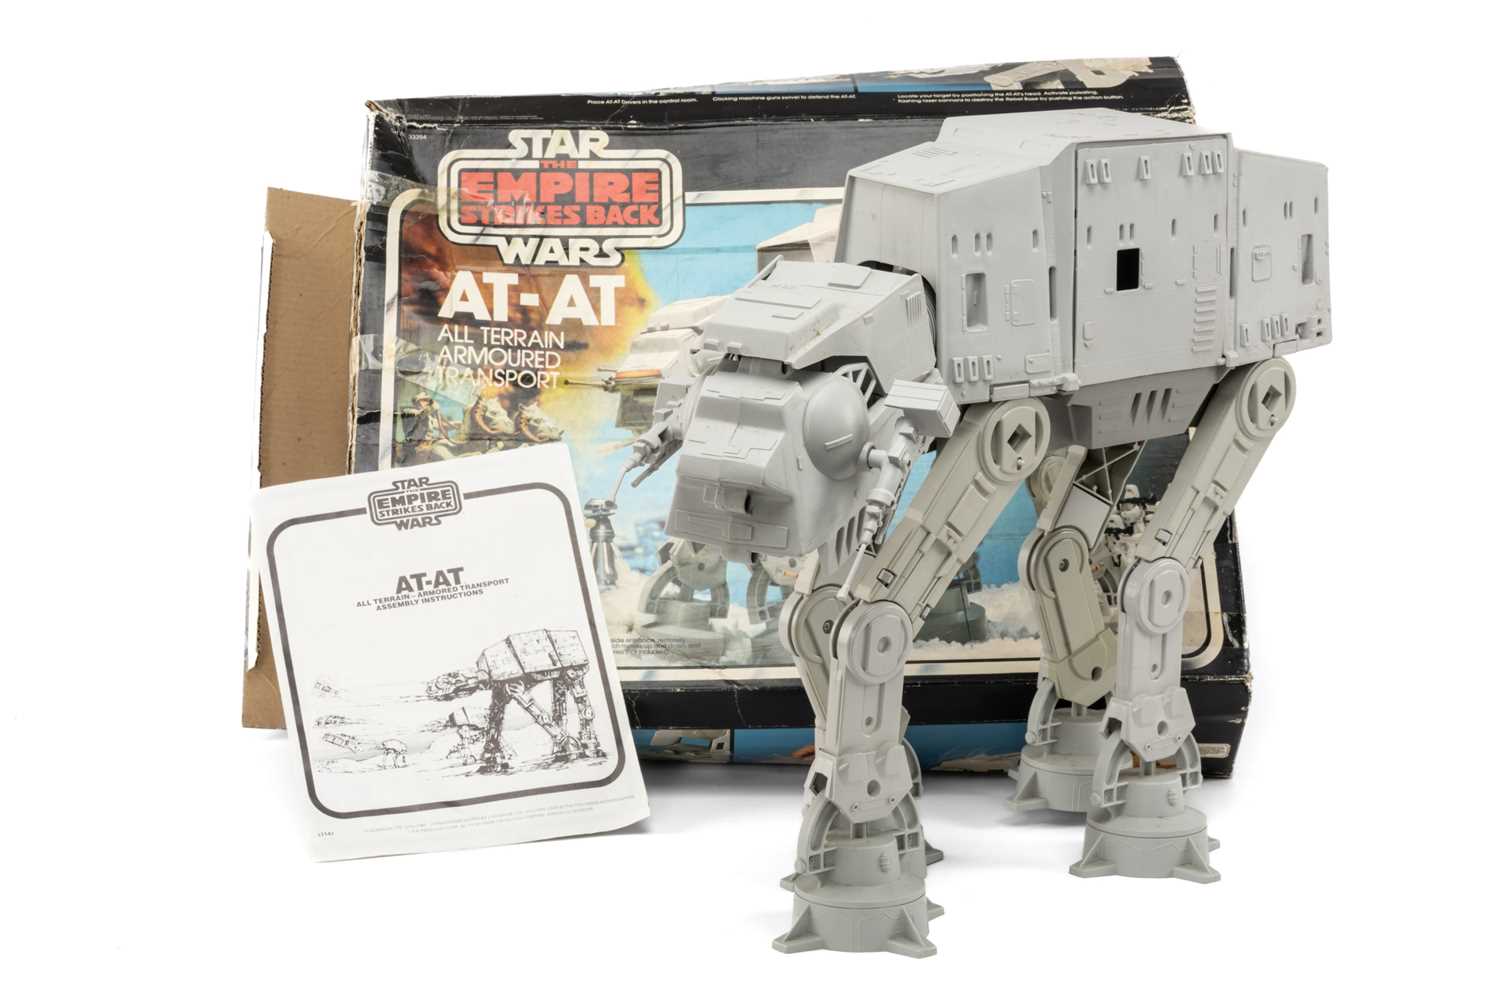 PALITOY STAR WARS, 1980, THE EMPIRE STRIKES BACK, AT-AT, 'All Terrain Armoured Transport' action